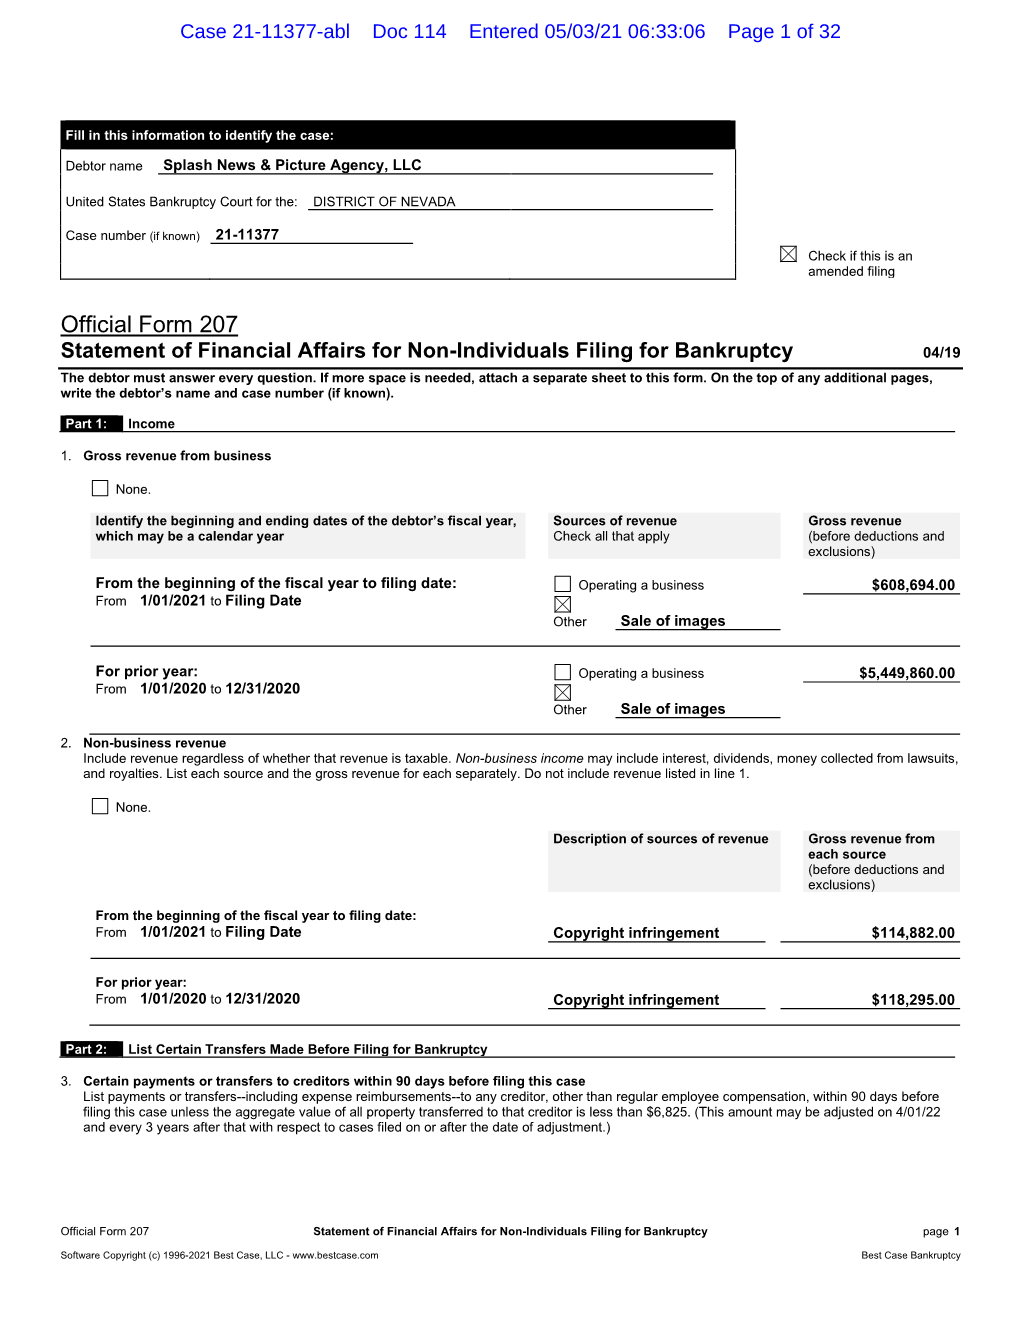 Official Form 207 Statement of Financial Affairs for Non-Individuals Filing for Bankruptcy 04/19 the Debtor Must Answer Every Question